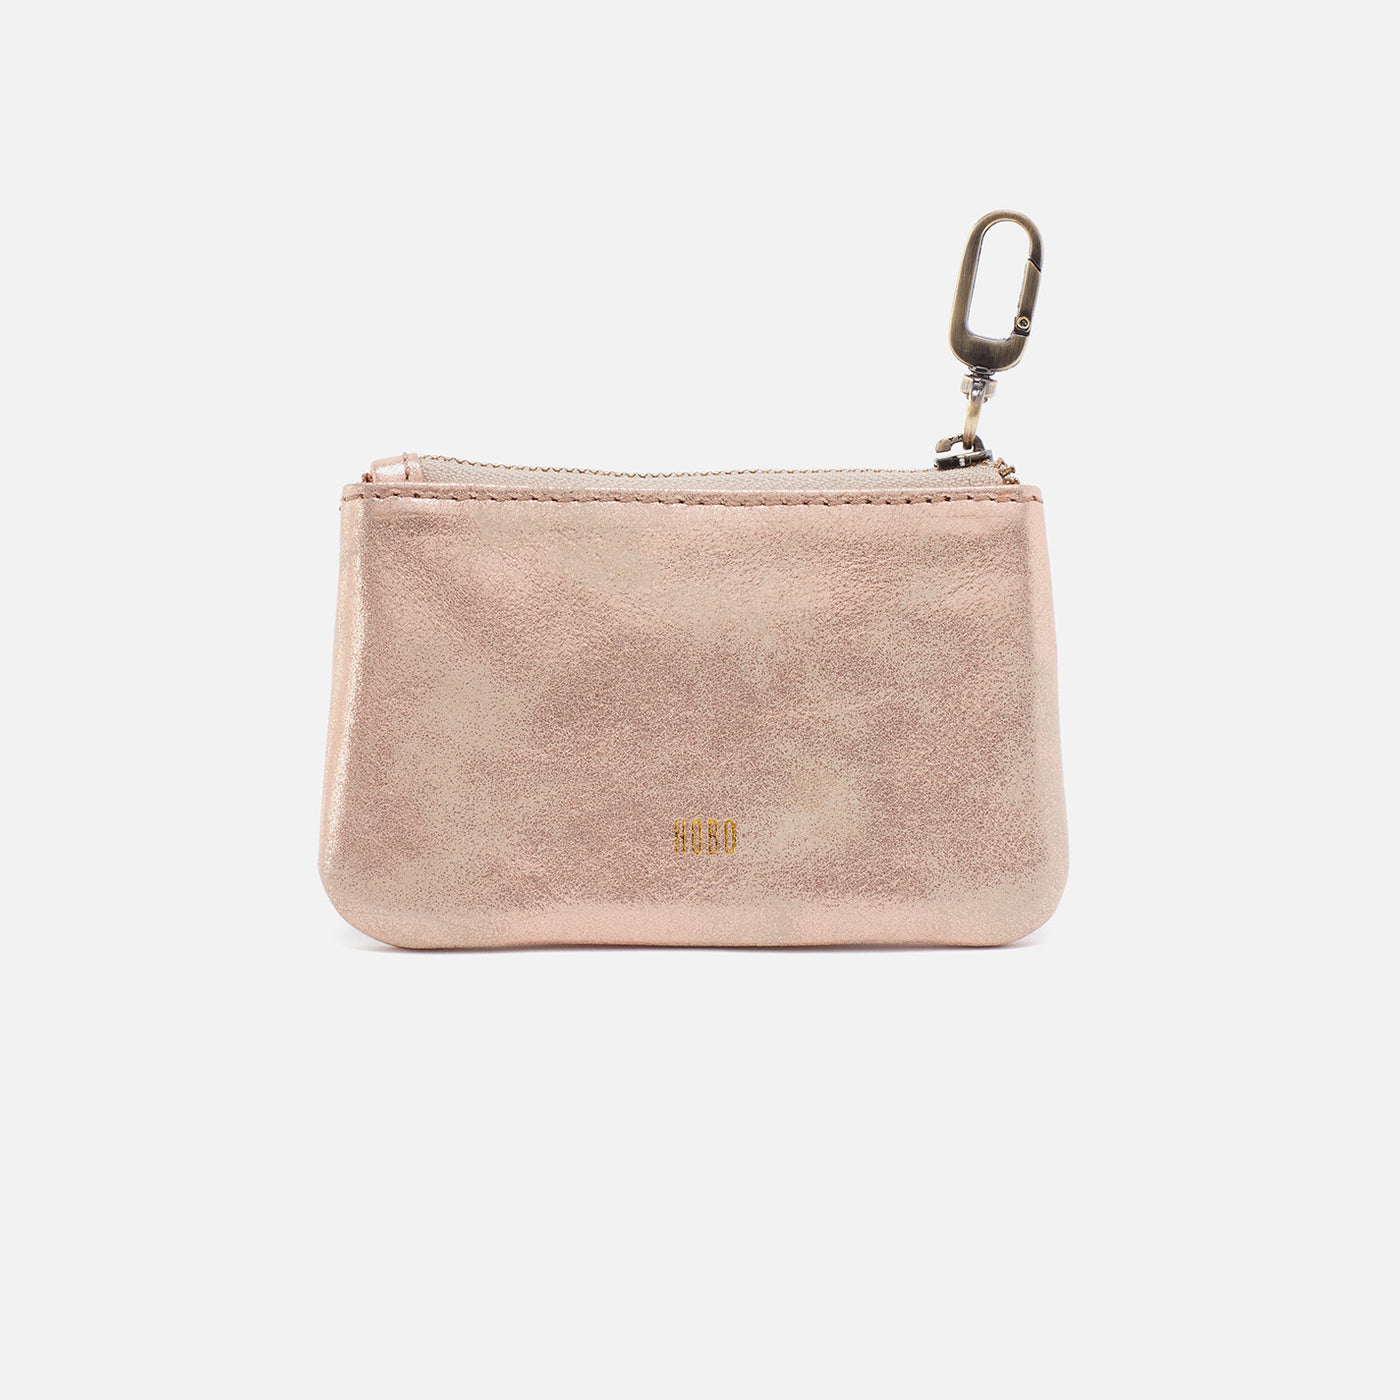 Monogram Pouch in Metallic Soft Leather - S